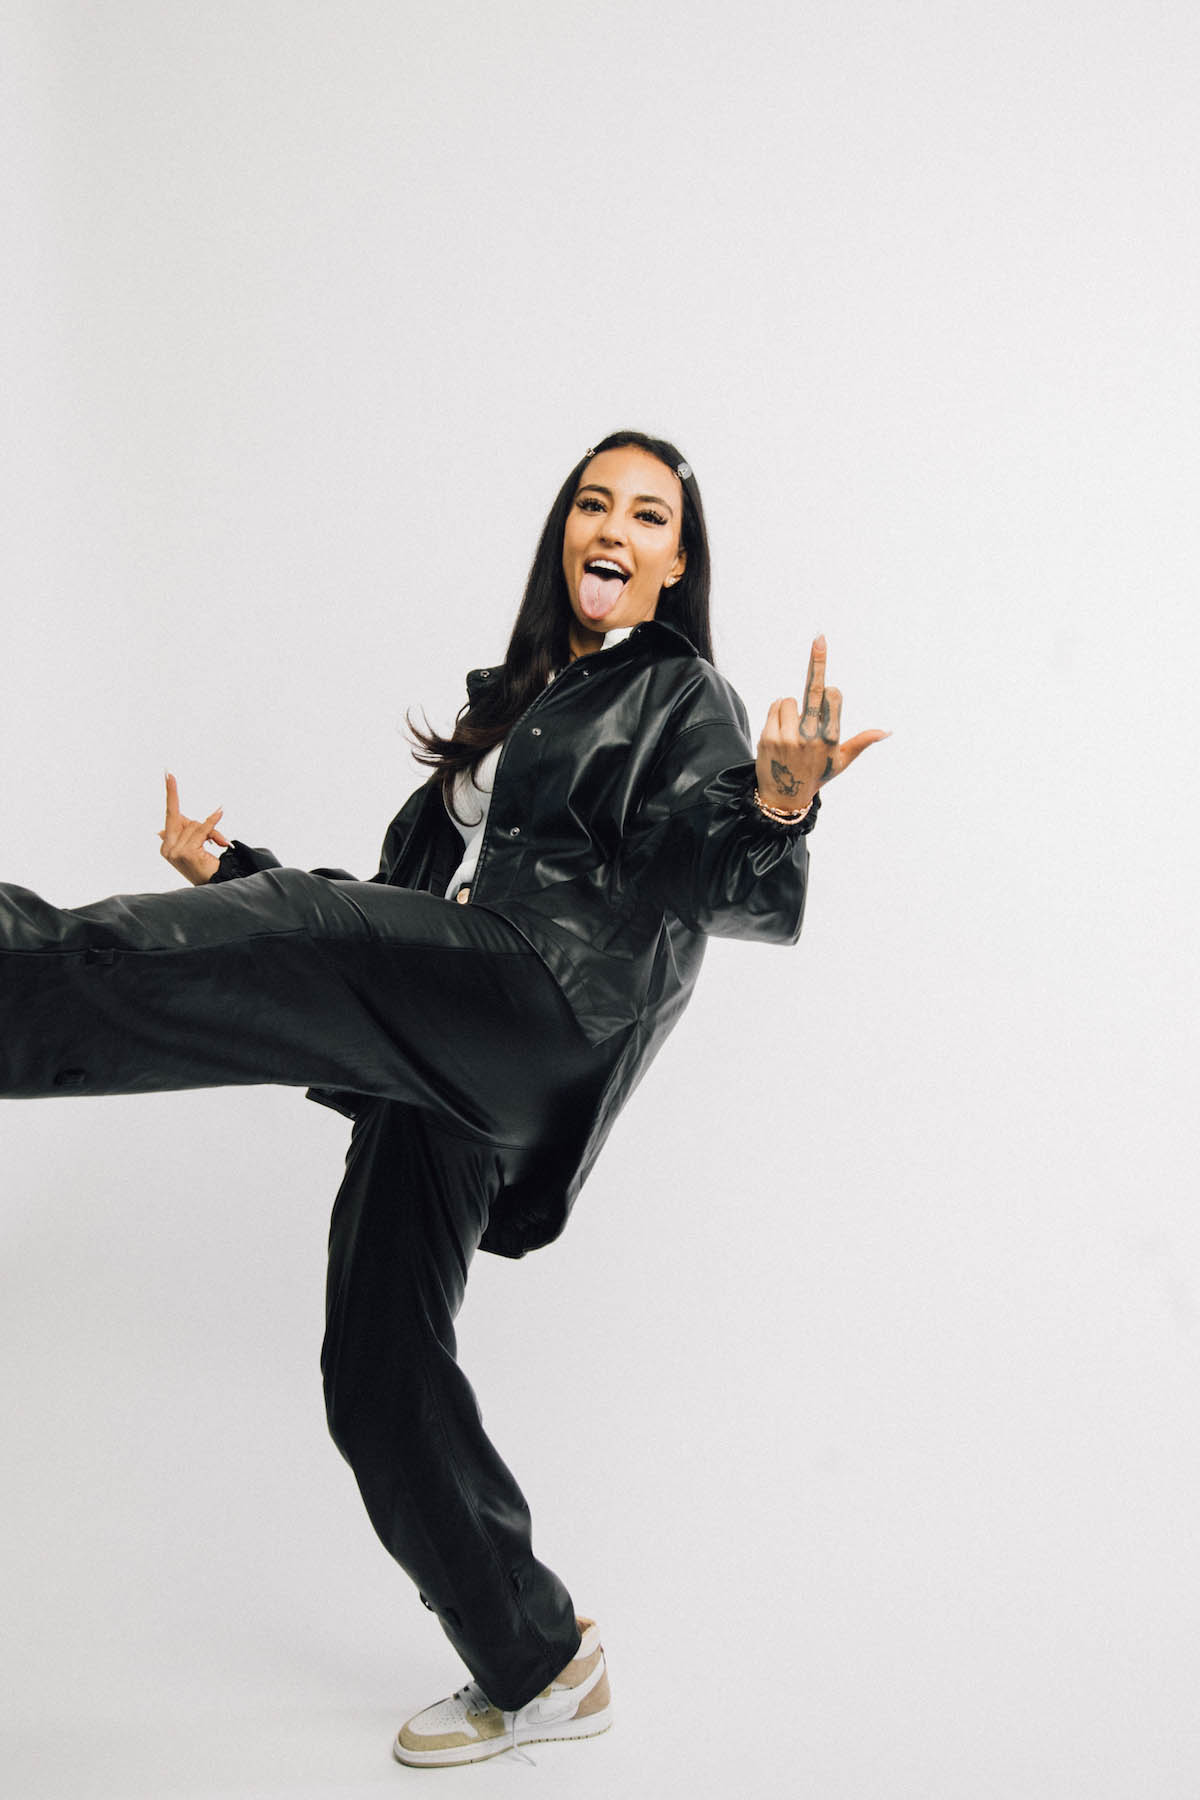 Young woman with long dark hair with a hair clip. She is wearing black oversized trousers and a black oversized jacket with a patent look. She stands on her right leg and swings her left out of the picture. With her left hand she shows her middle finger, on her right she has her index finger and little finger stretched out to form a "mano cornuta". She also sticks out her tongue.